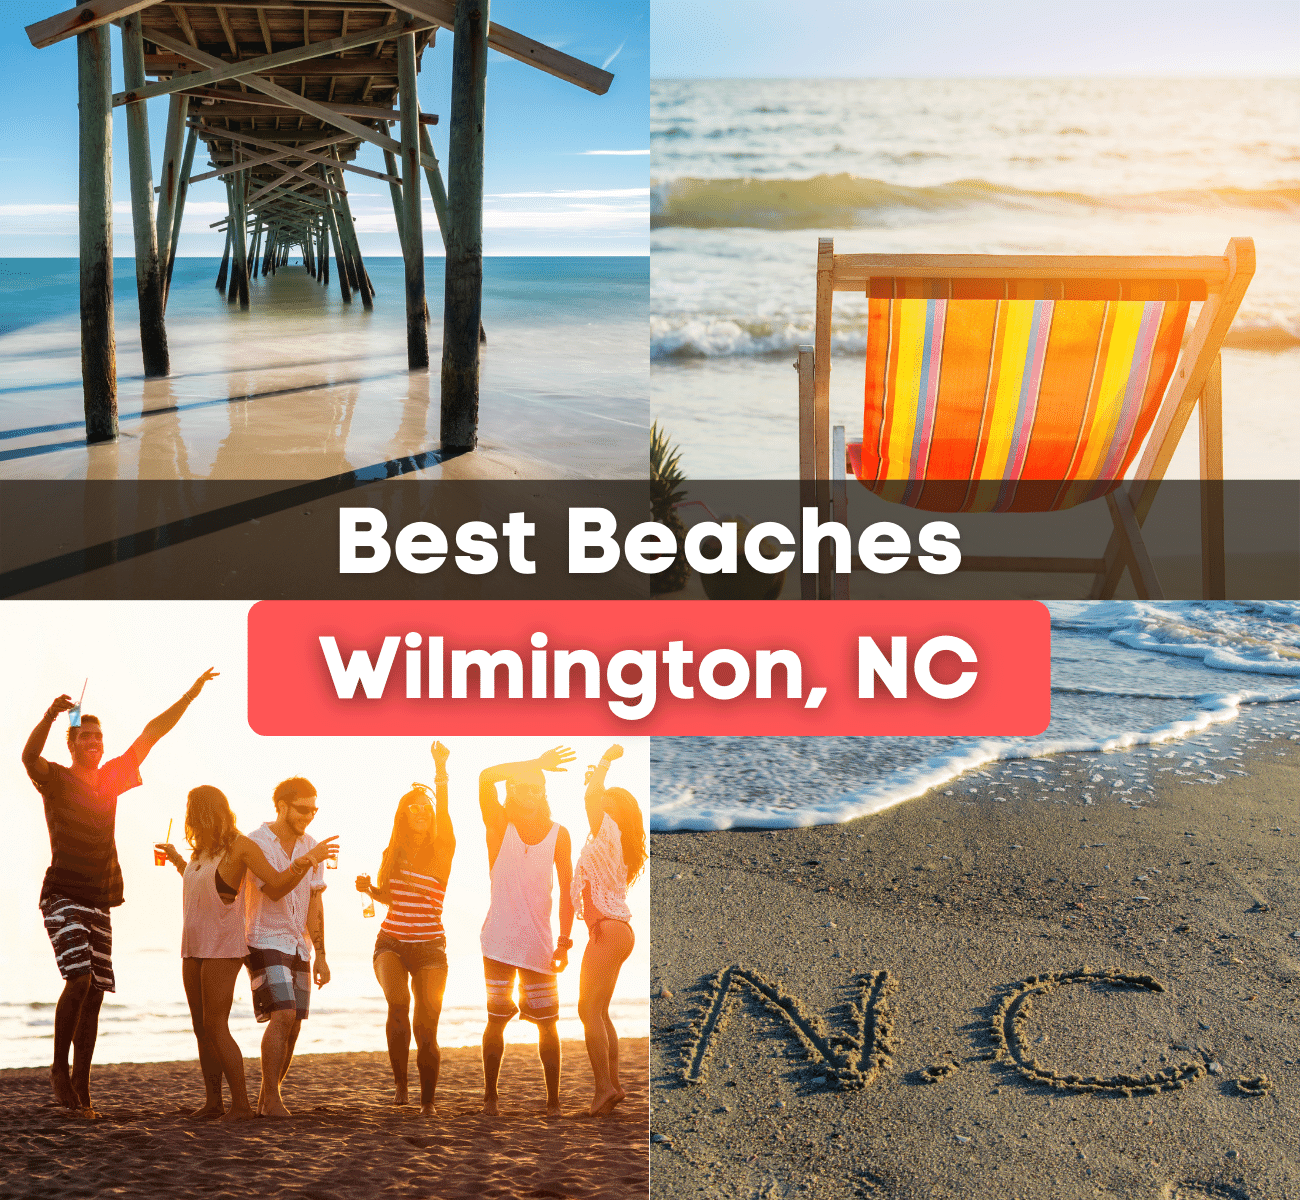 10 Best Beaches Near Wilmington NC - Here are the coolest beaches